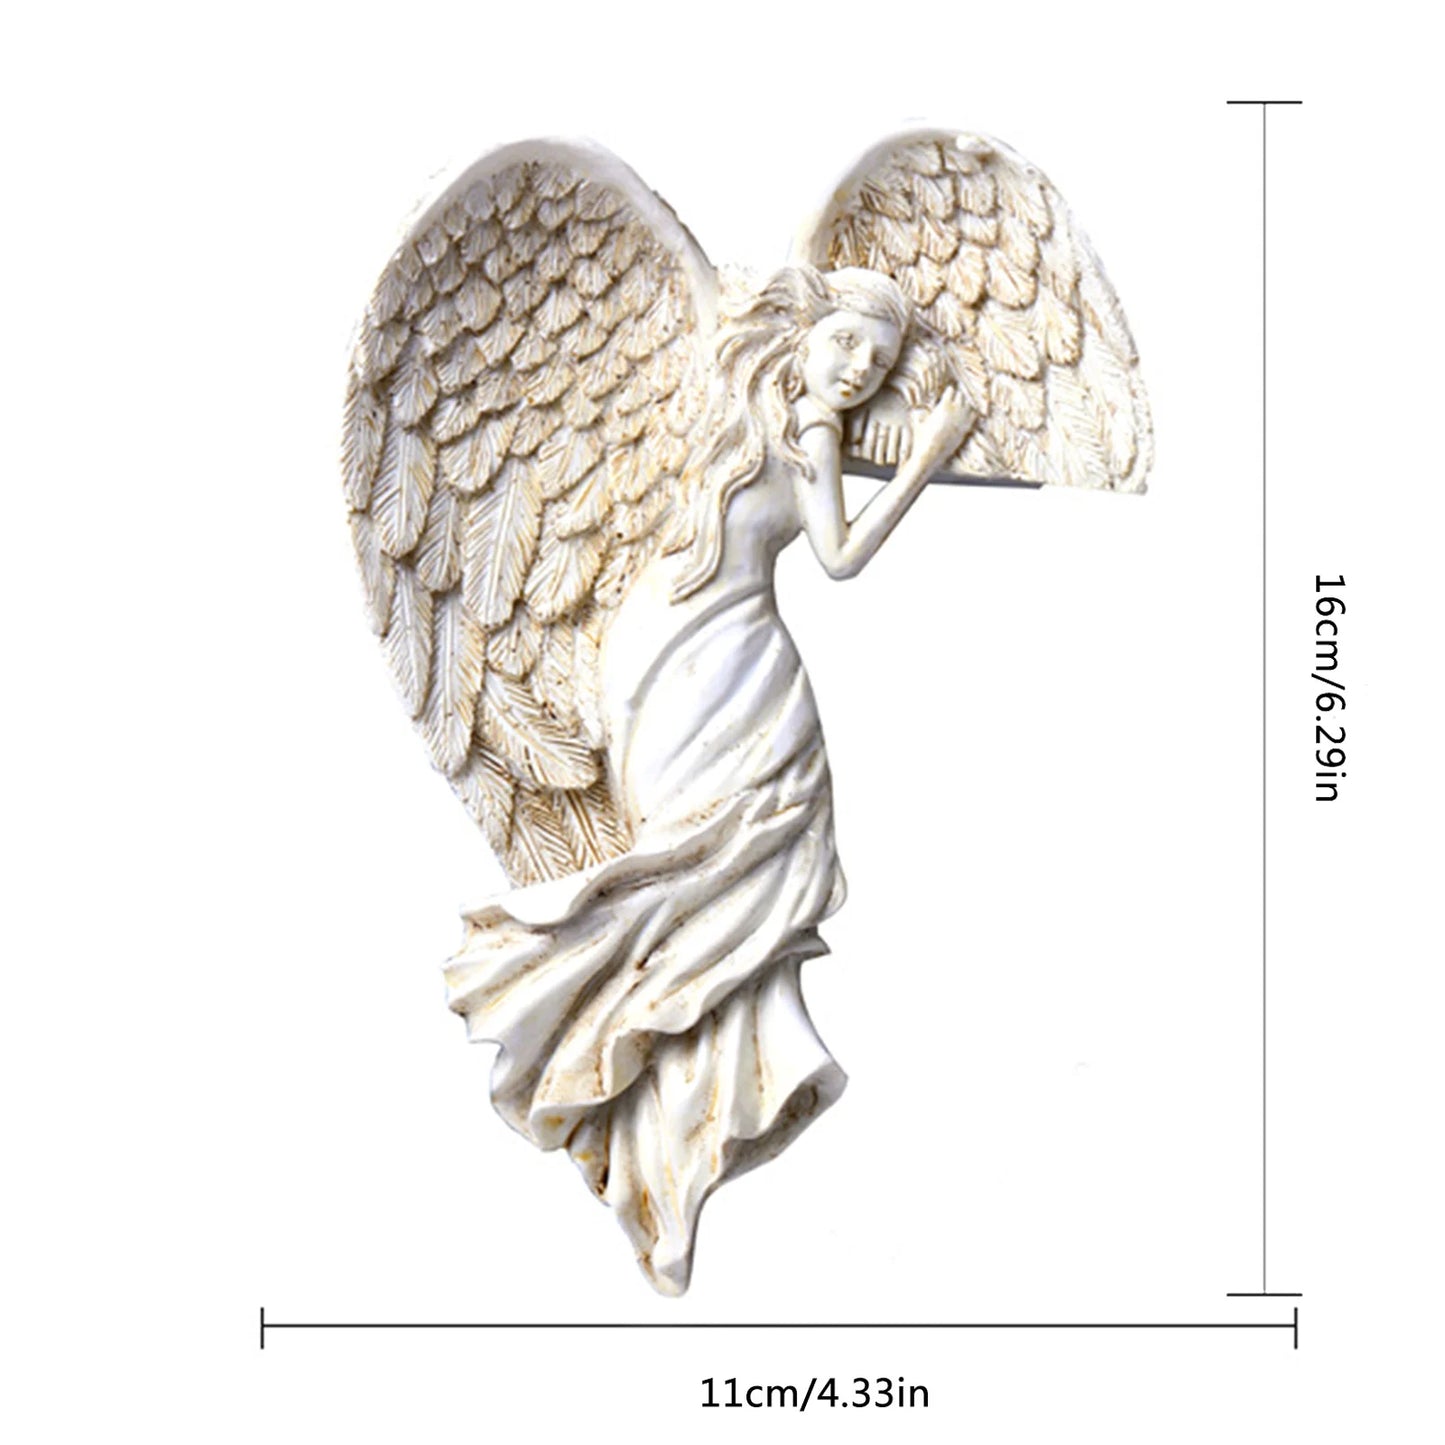 Door Frame Angel Wing Sculpture Simple Angel Ornament with Heart-shaped Wings Decorative Figurines for Home Living Room Bedroom